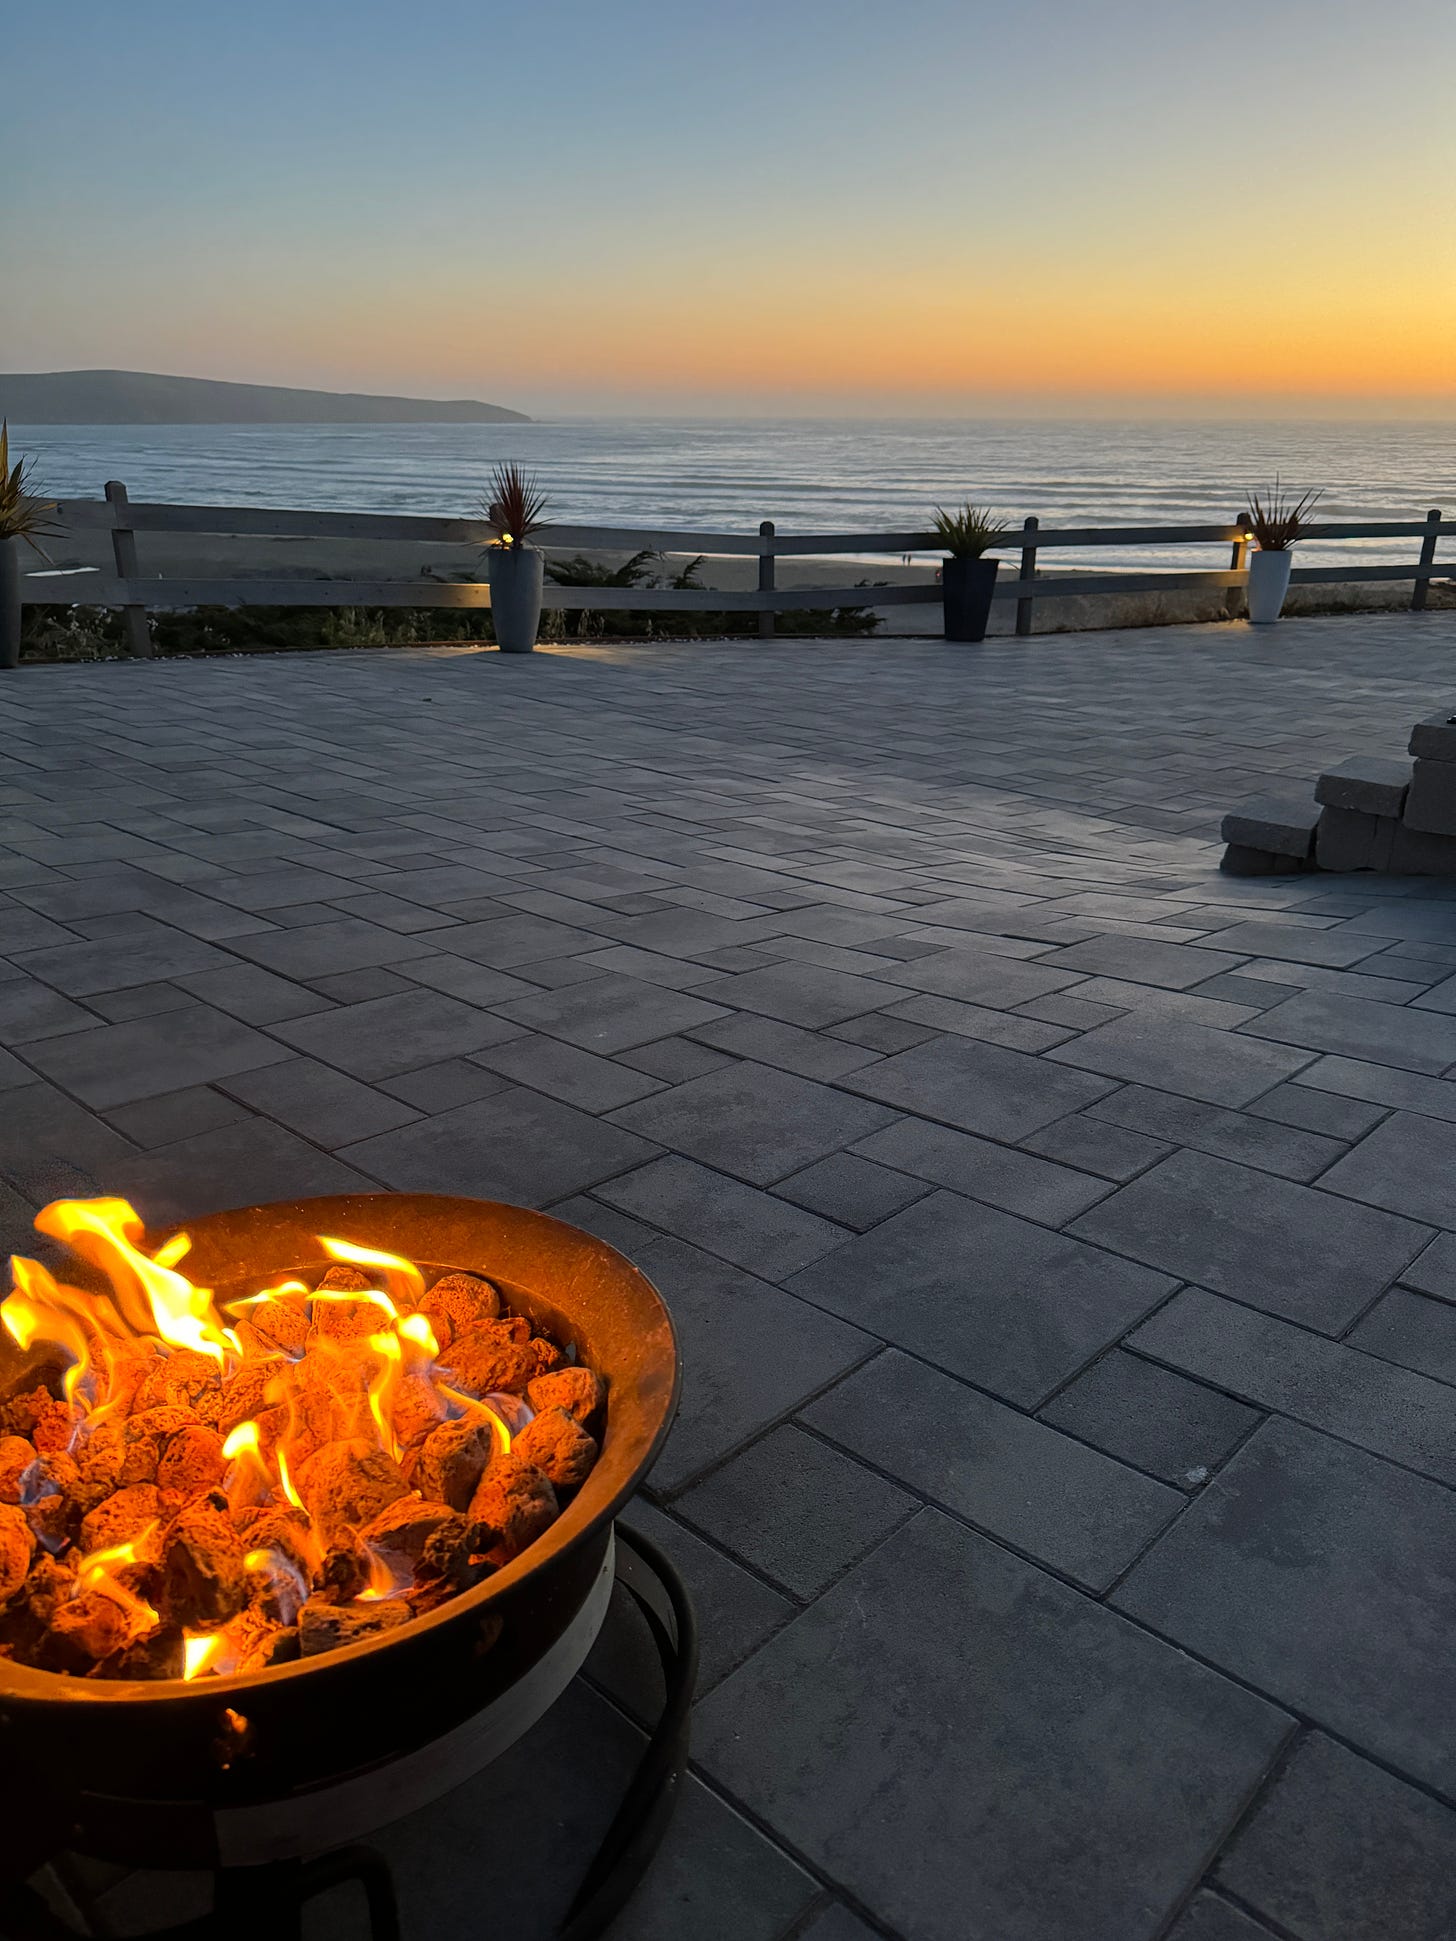 An image of a fire pit, an expanse of deck, and the sun setting over the ocean in northern California